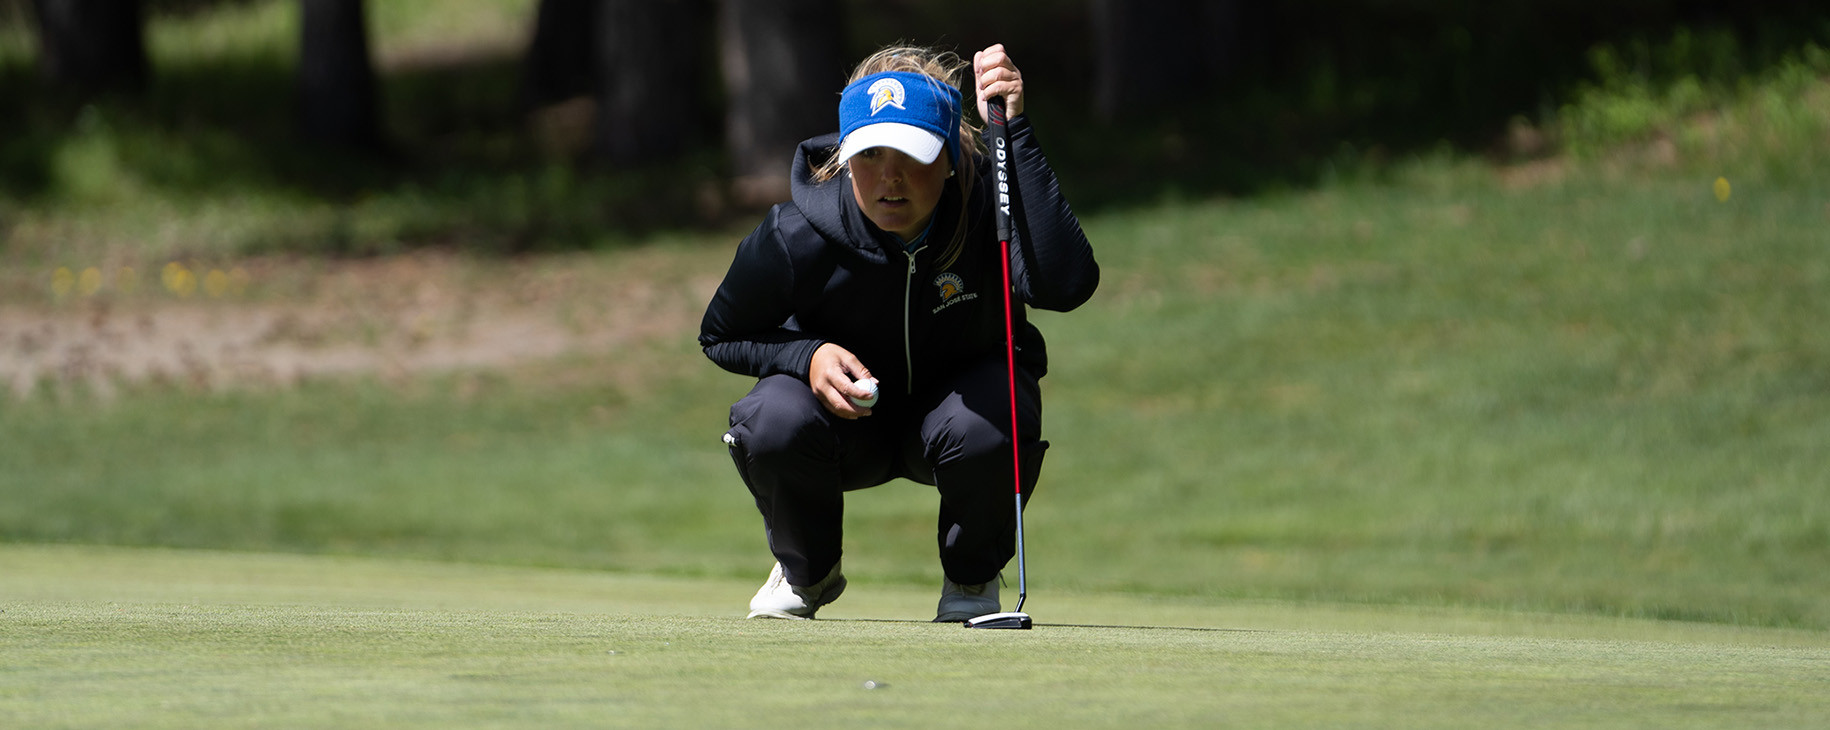 Spartans Tied For 5th After Second Round of NCAA Regional